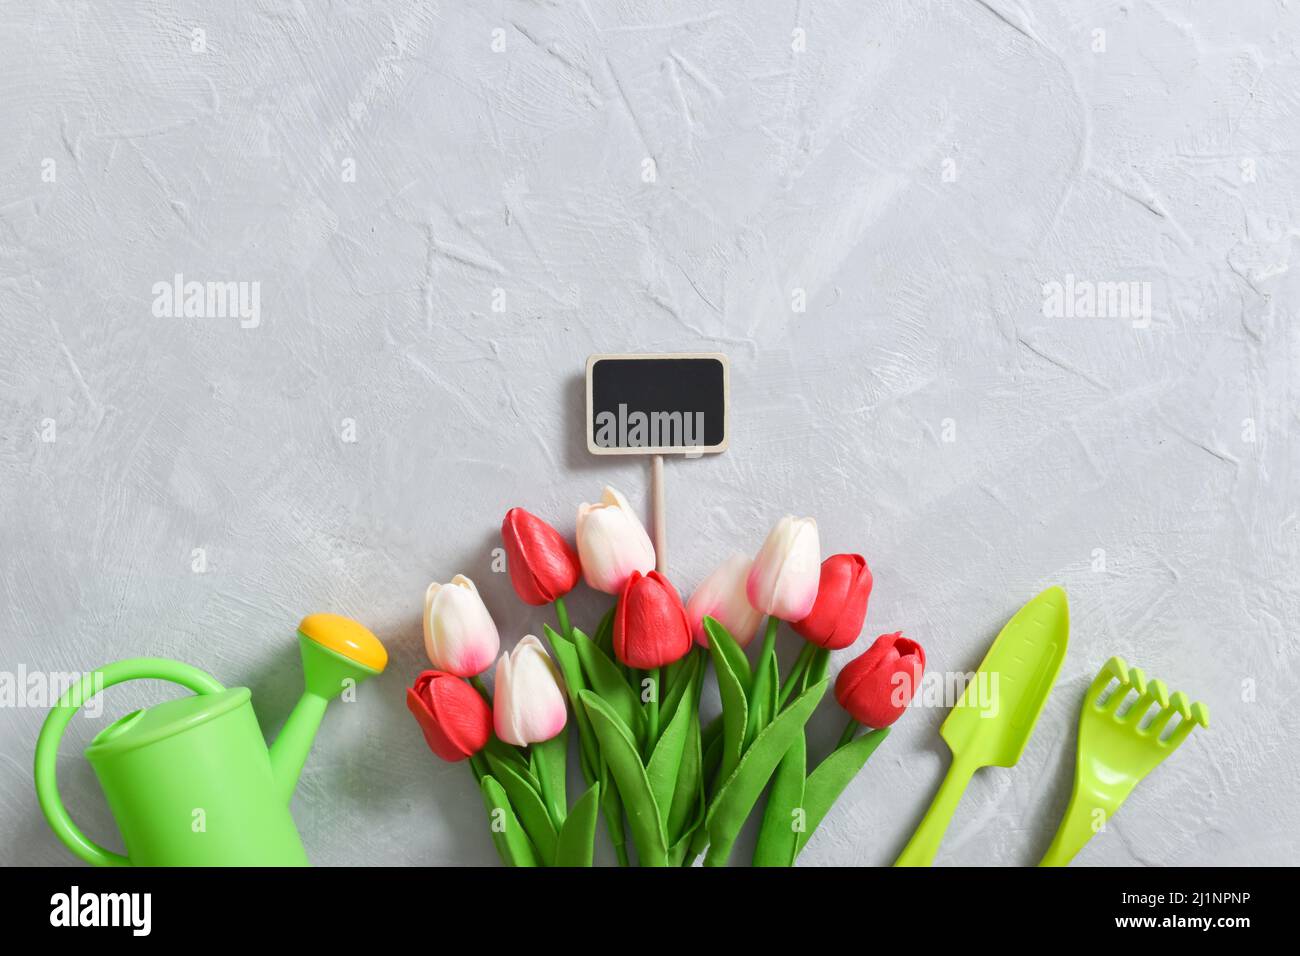 Garden tools and a bouquet of tulips with a small sign for recording. Stock Photo